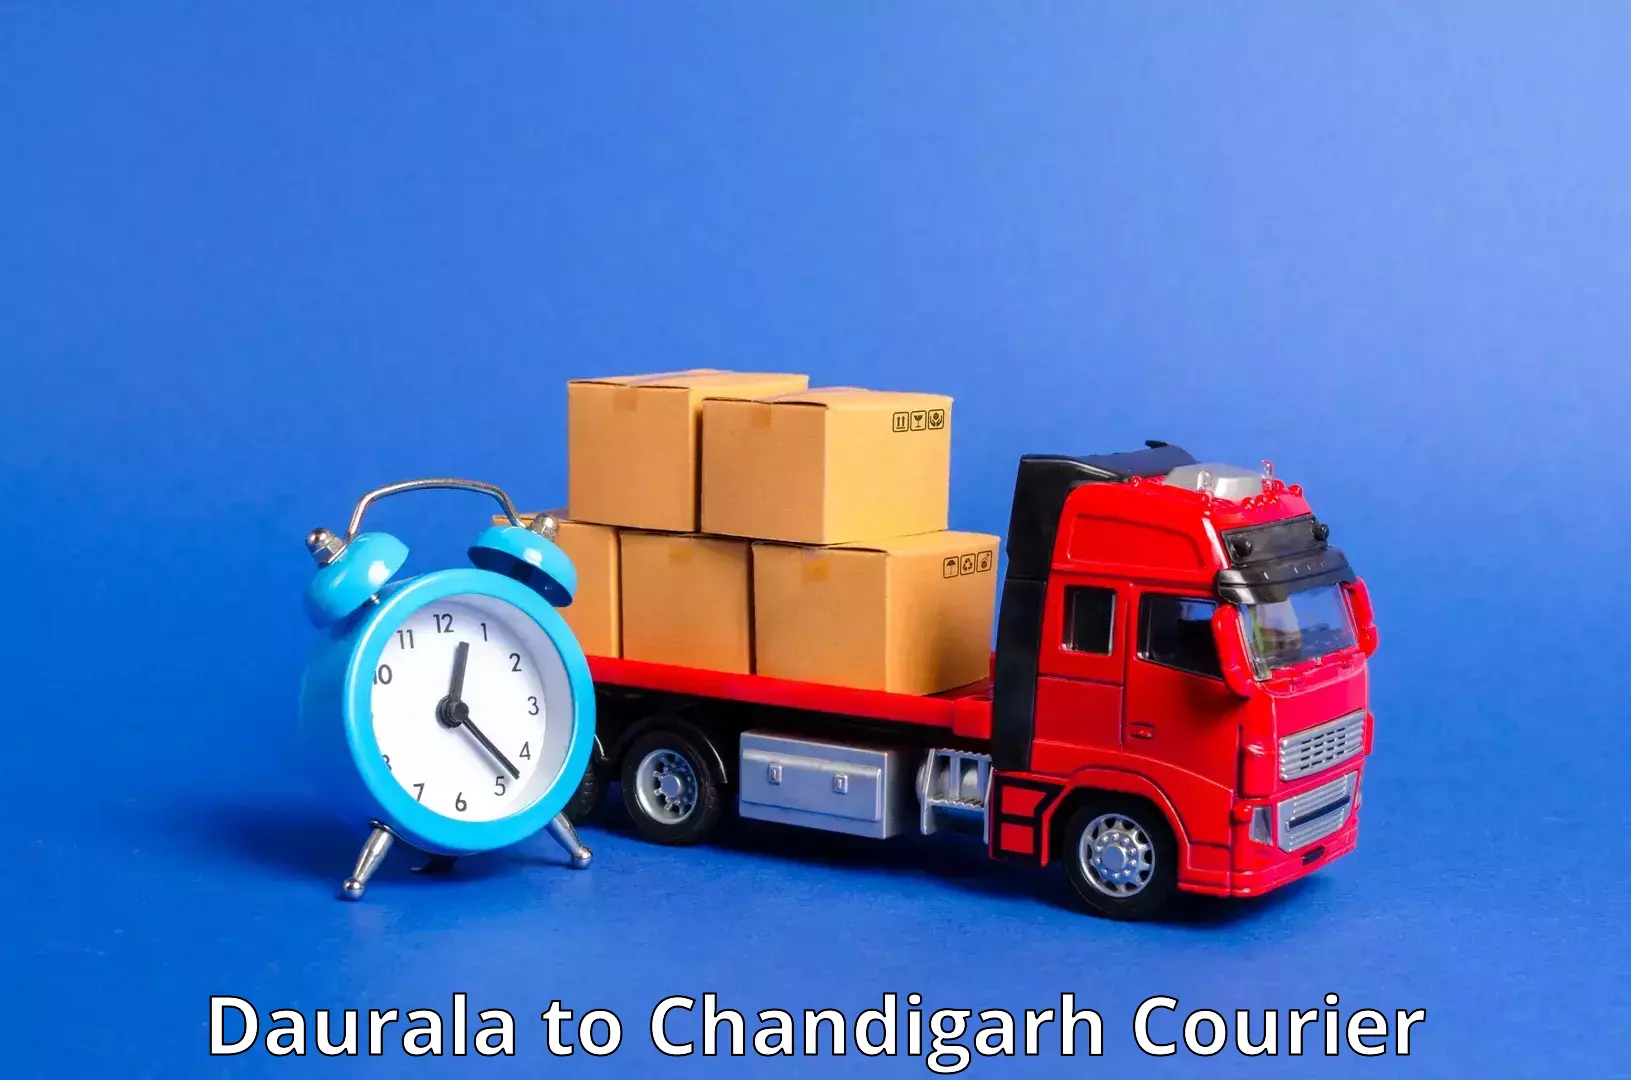 Courier service innovation Daurala to Chandigarh